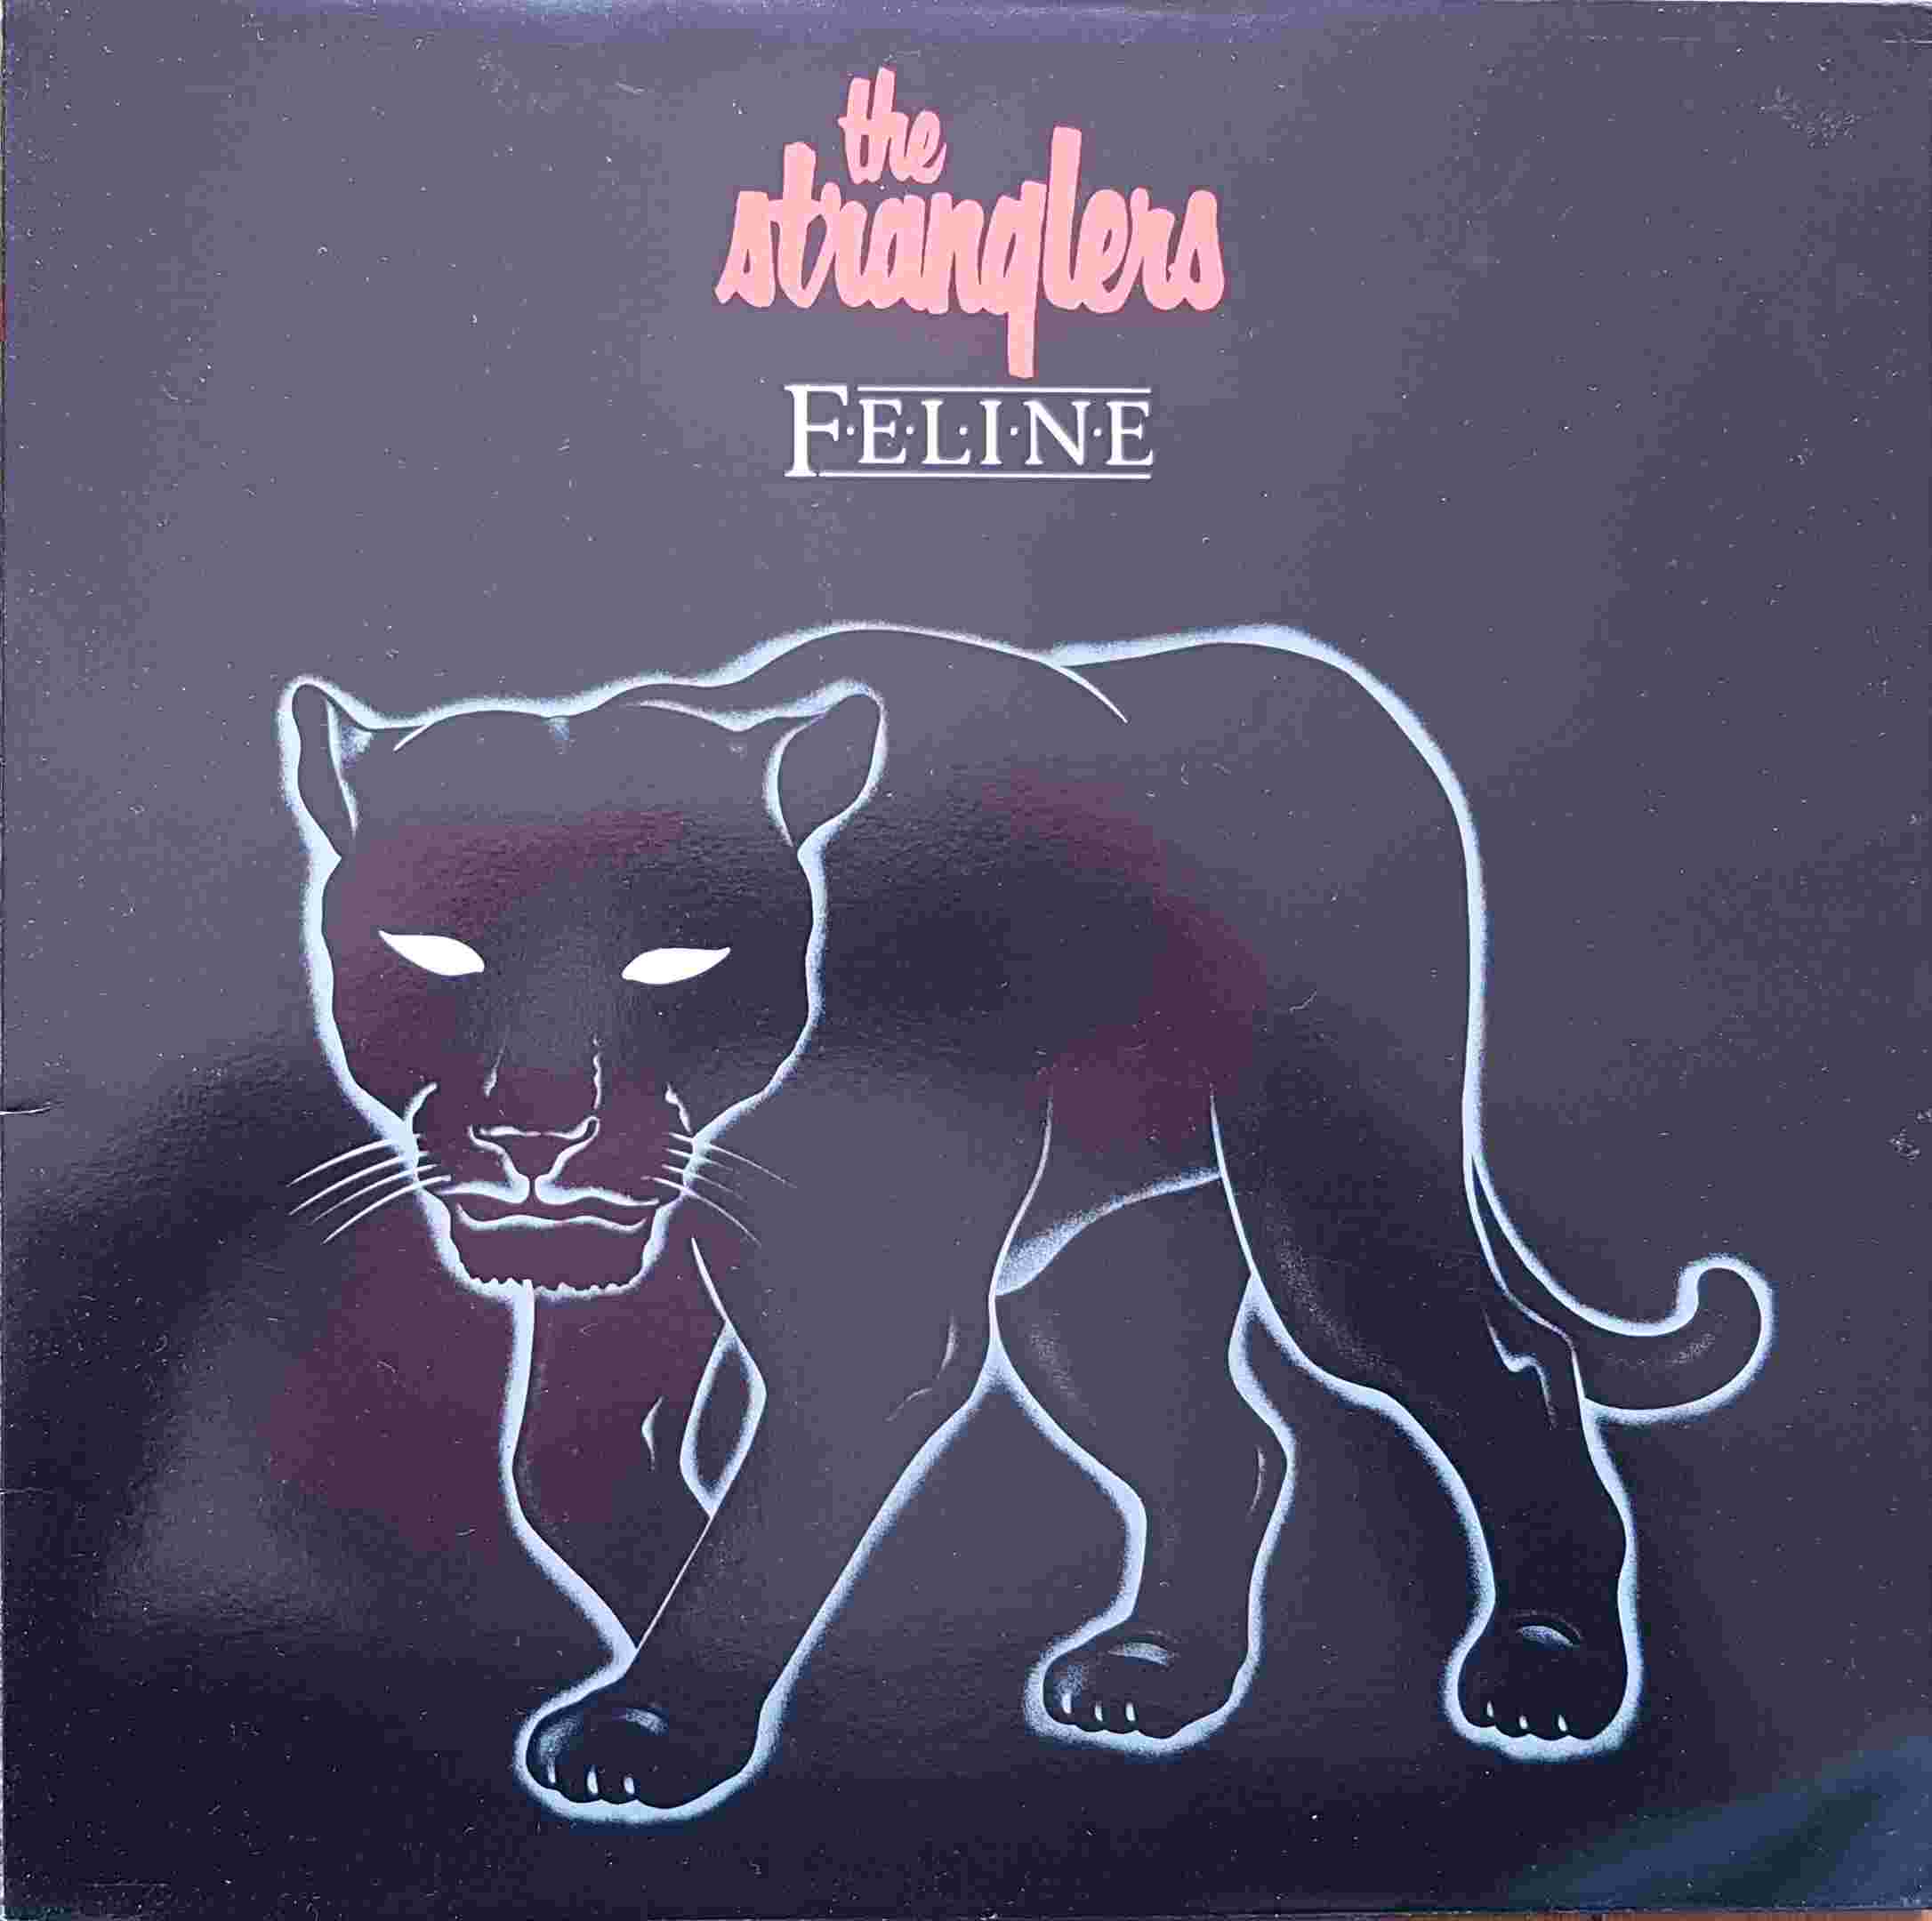 Picture of EPC 25237 Feline by artist The Stranglers  from The Stranglers